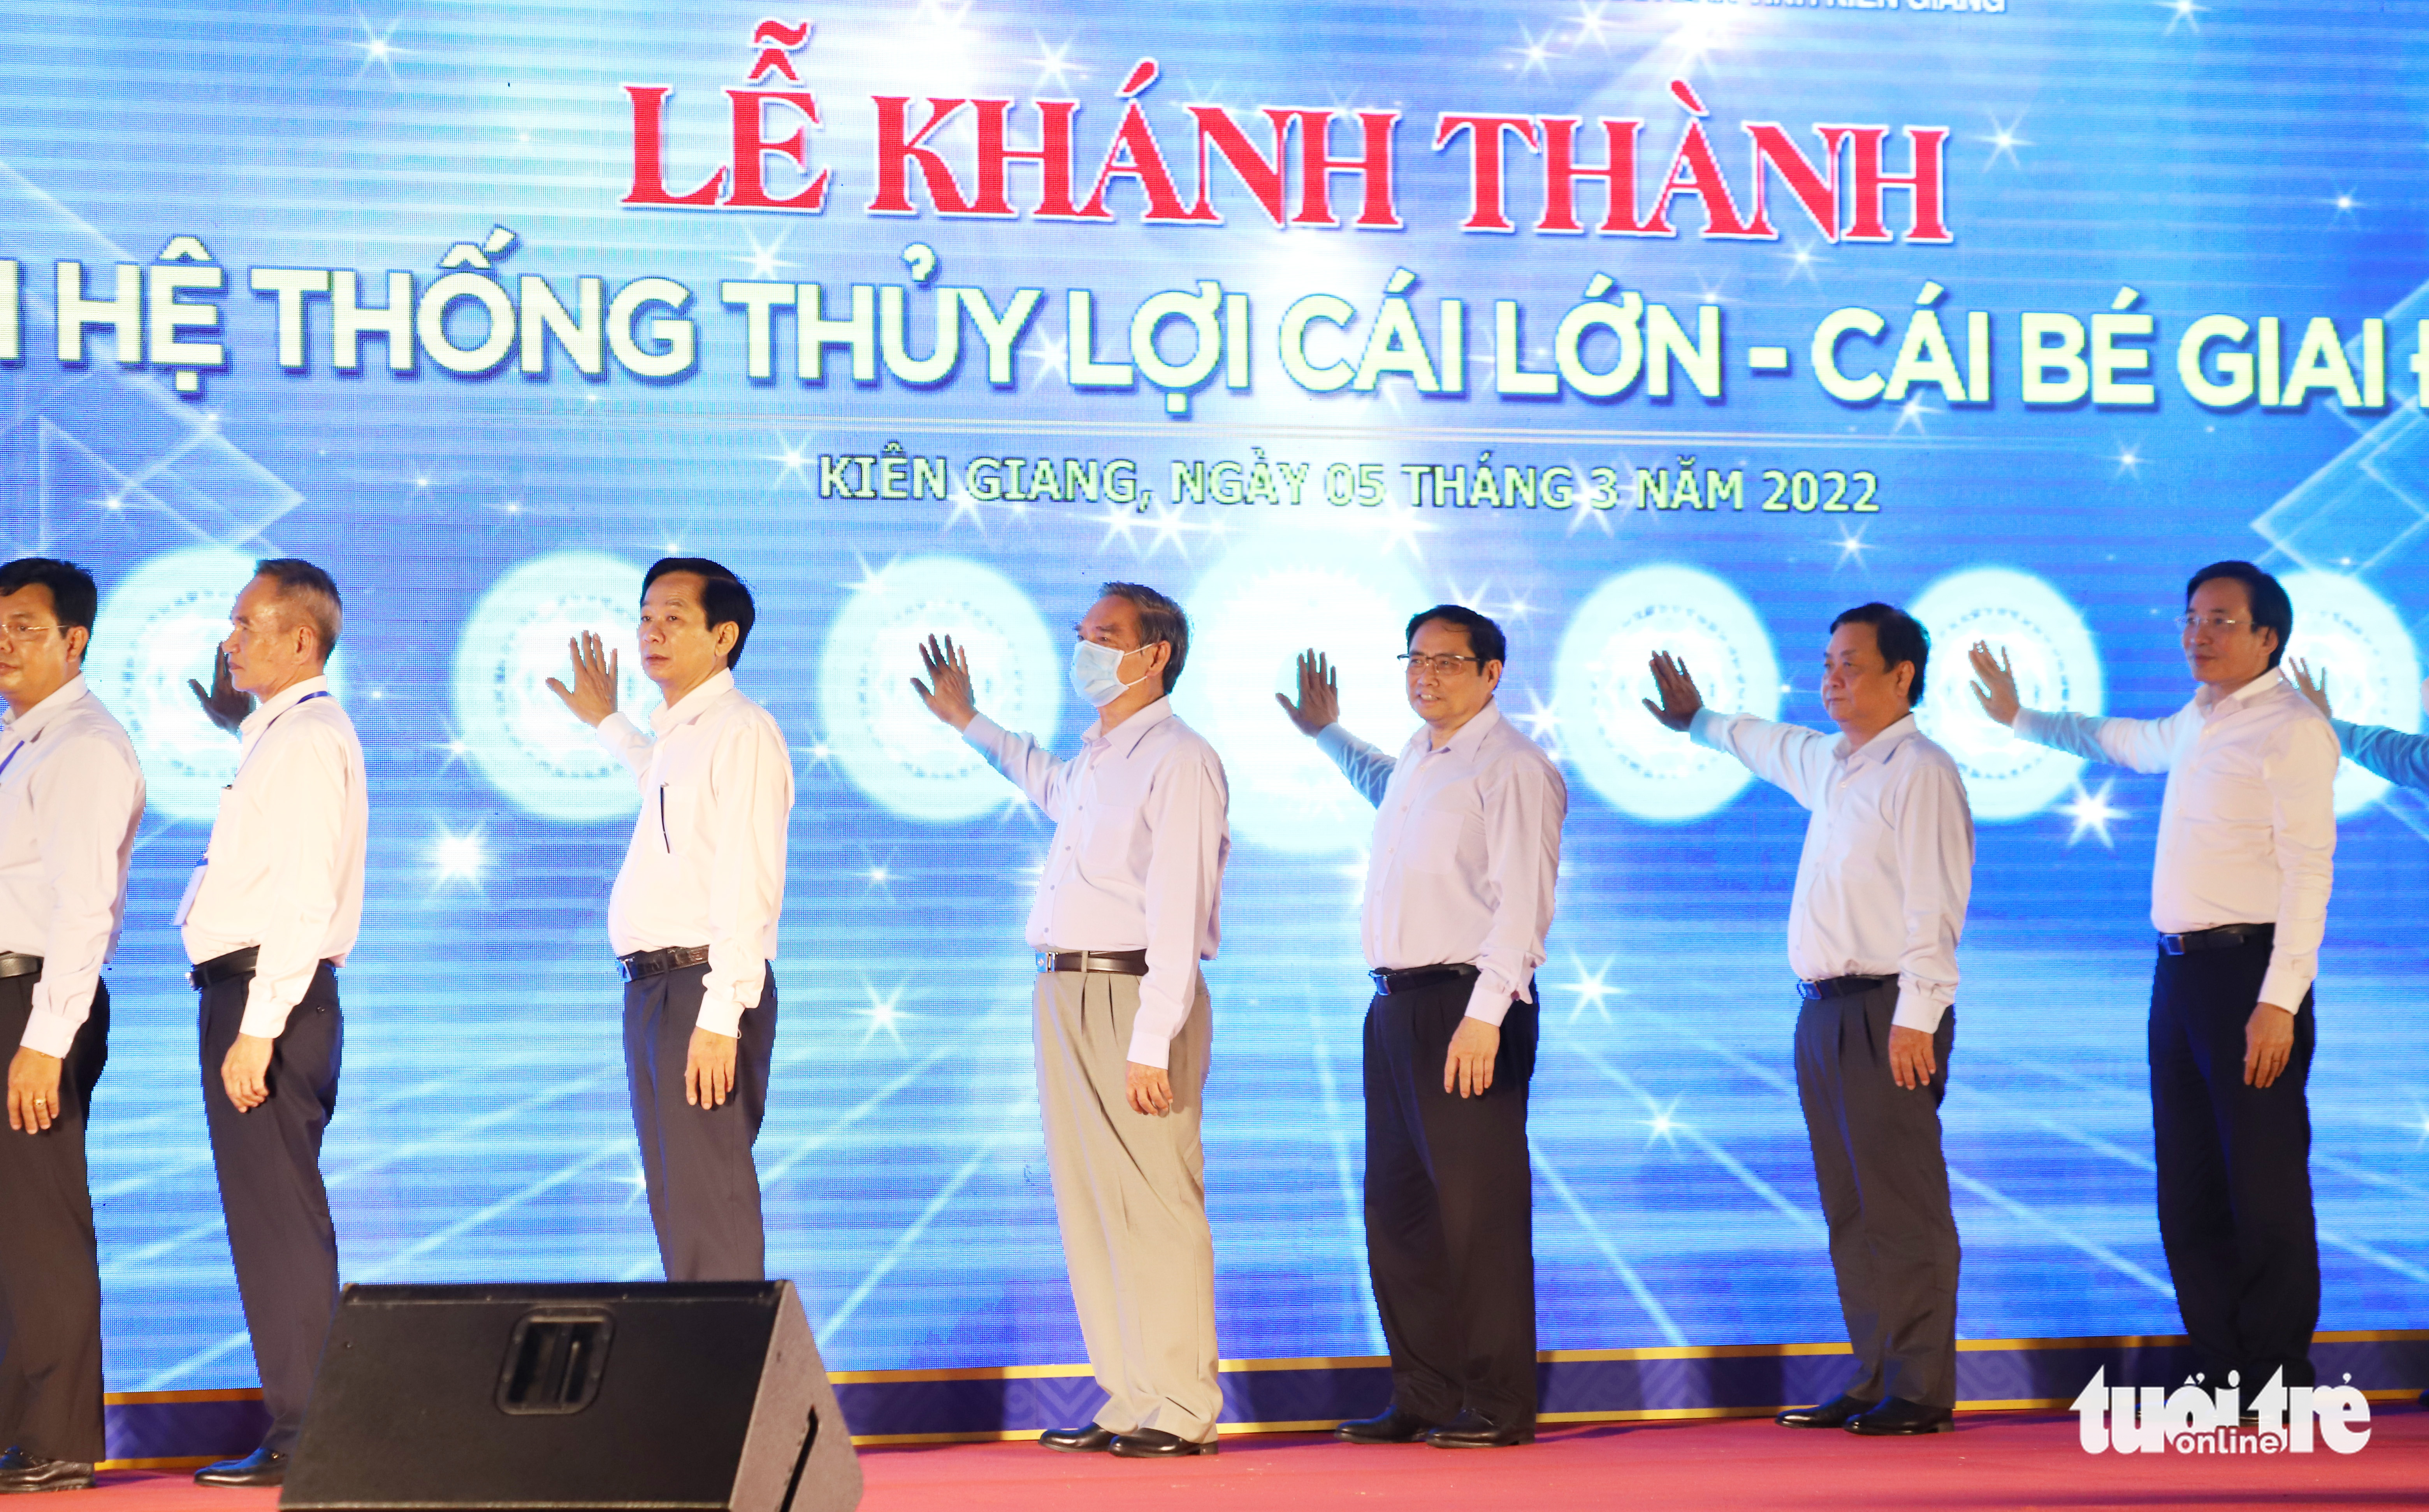 Prime Minister Pham Minh Chinh and leaders of localities in the Mekong Delta officially inaugurate the Cai Lon-Cai Be irrigation system, March 5, 2022. Photo: Chi Quoc / Tuoi Tre